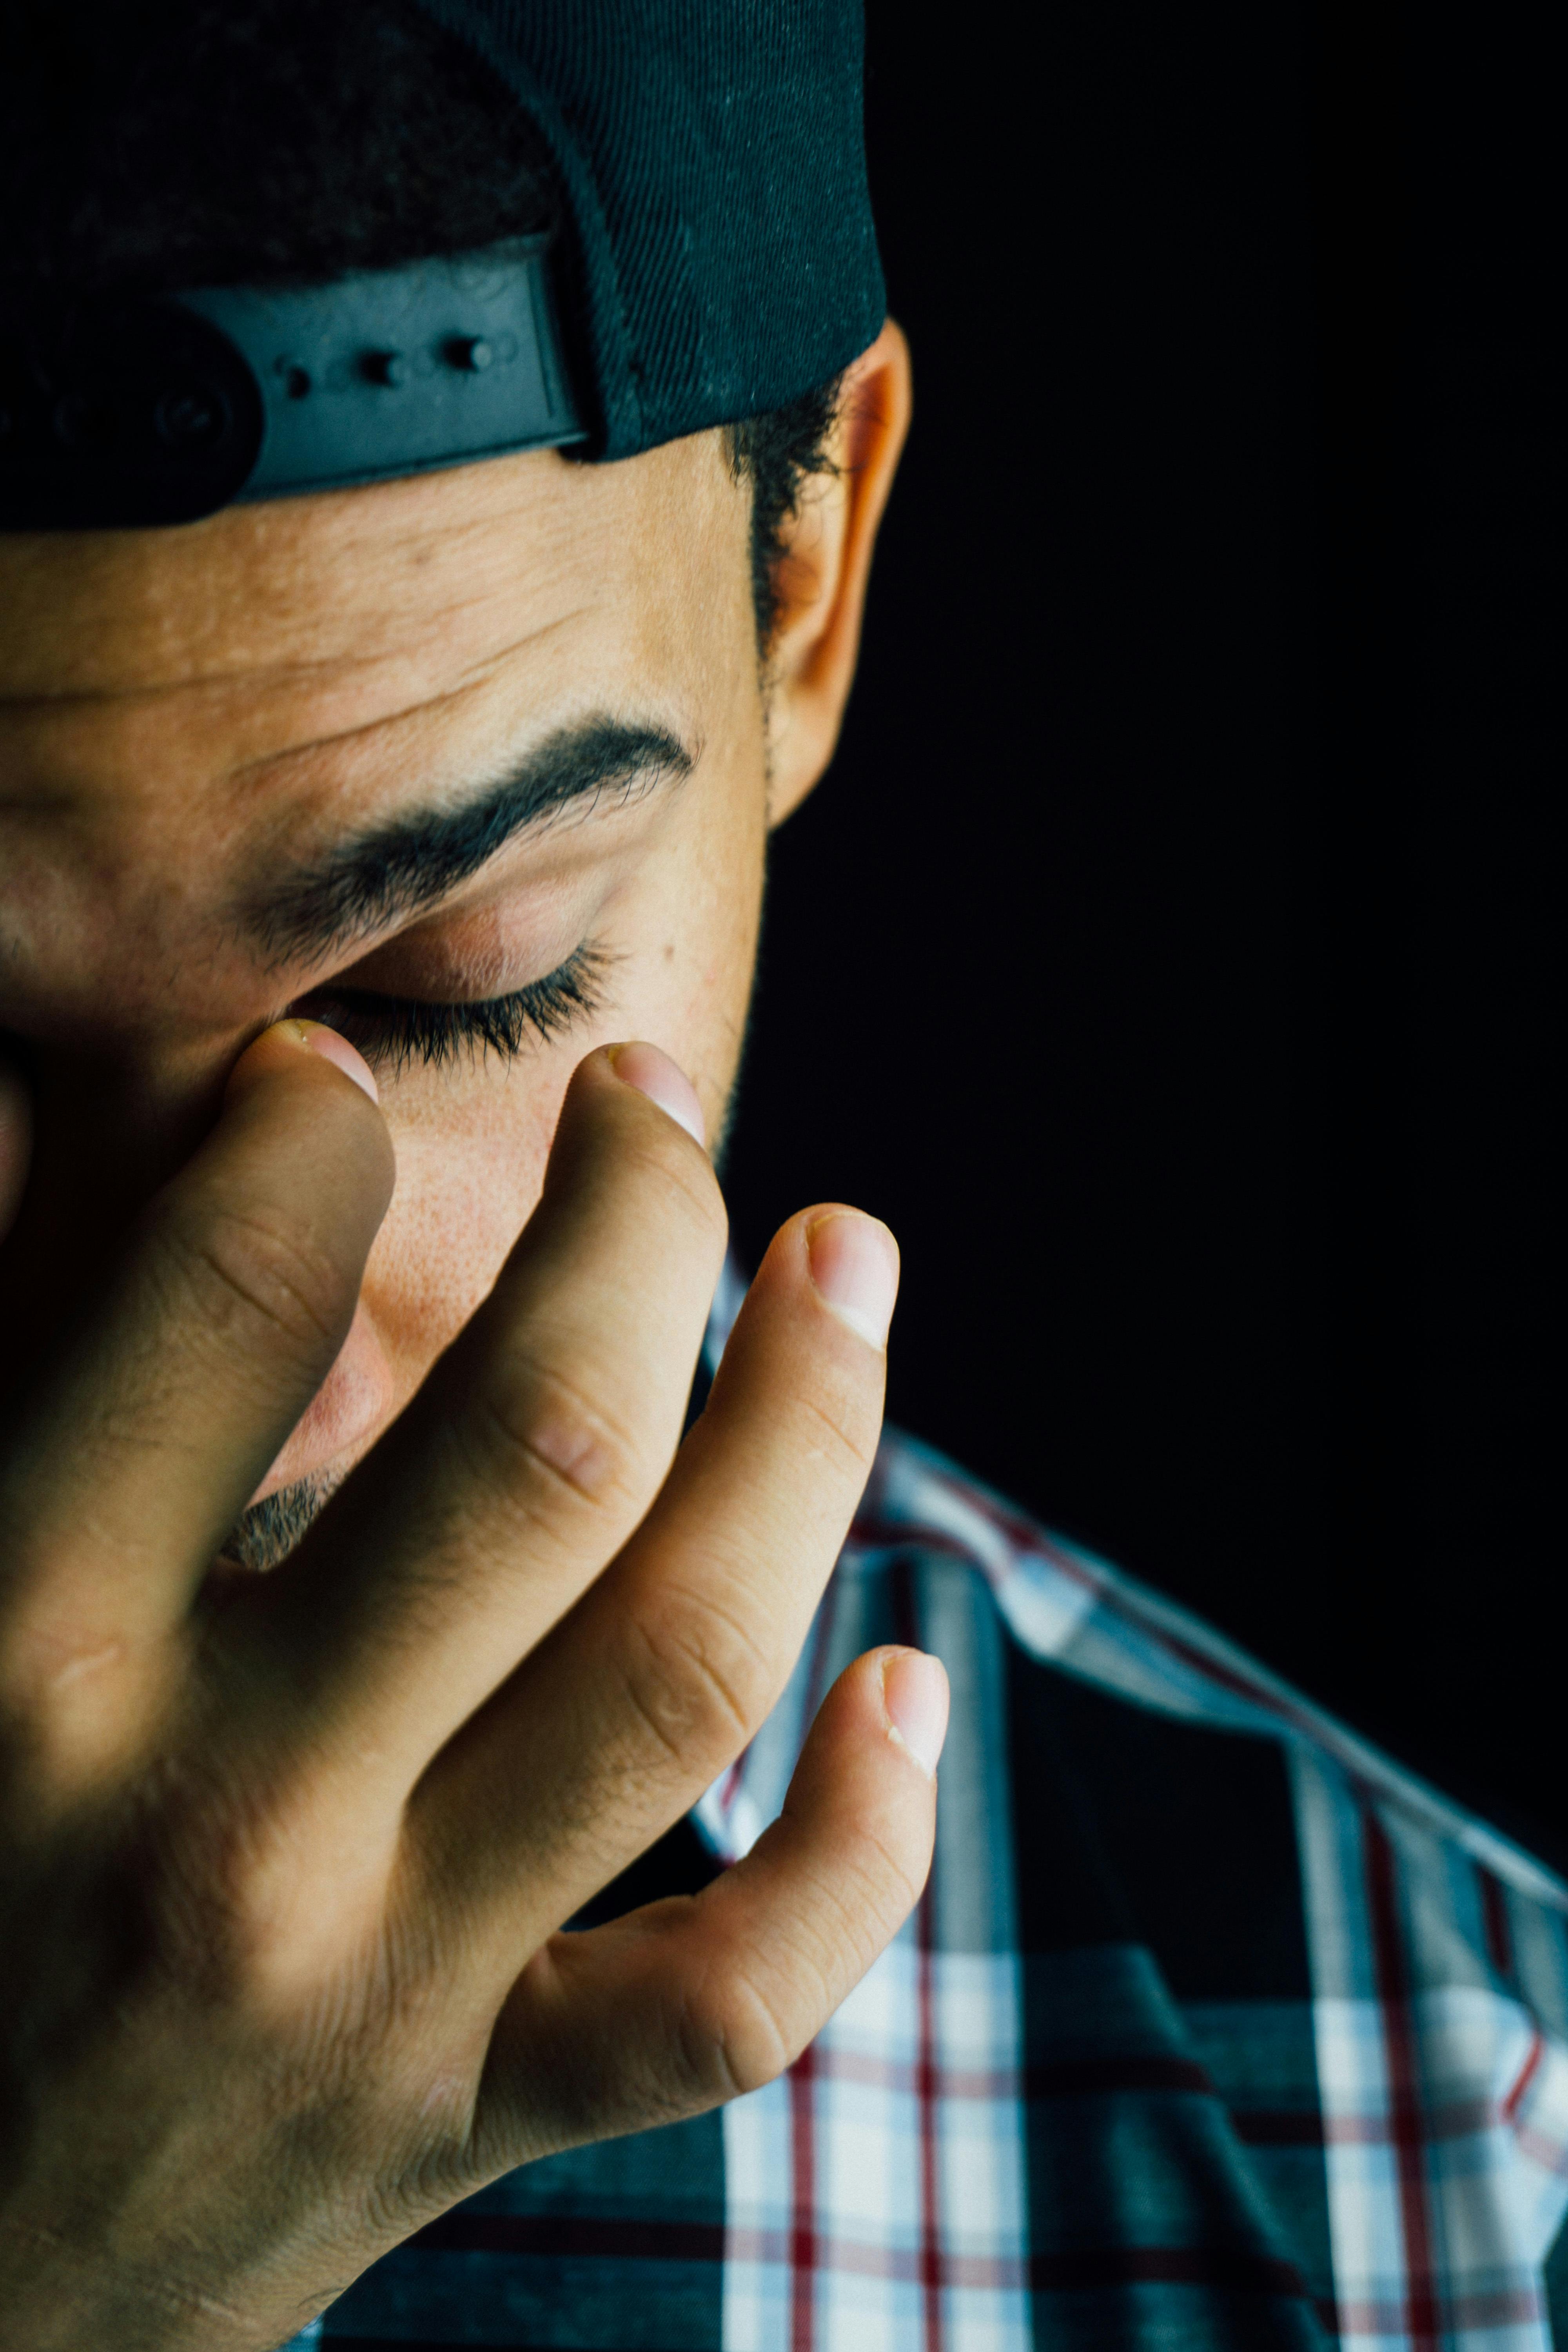 A side view of a frustrated man | Source: Pexels